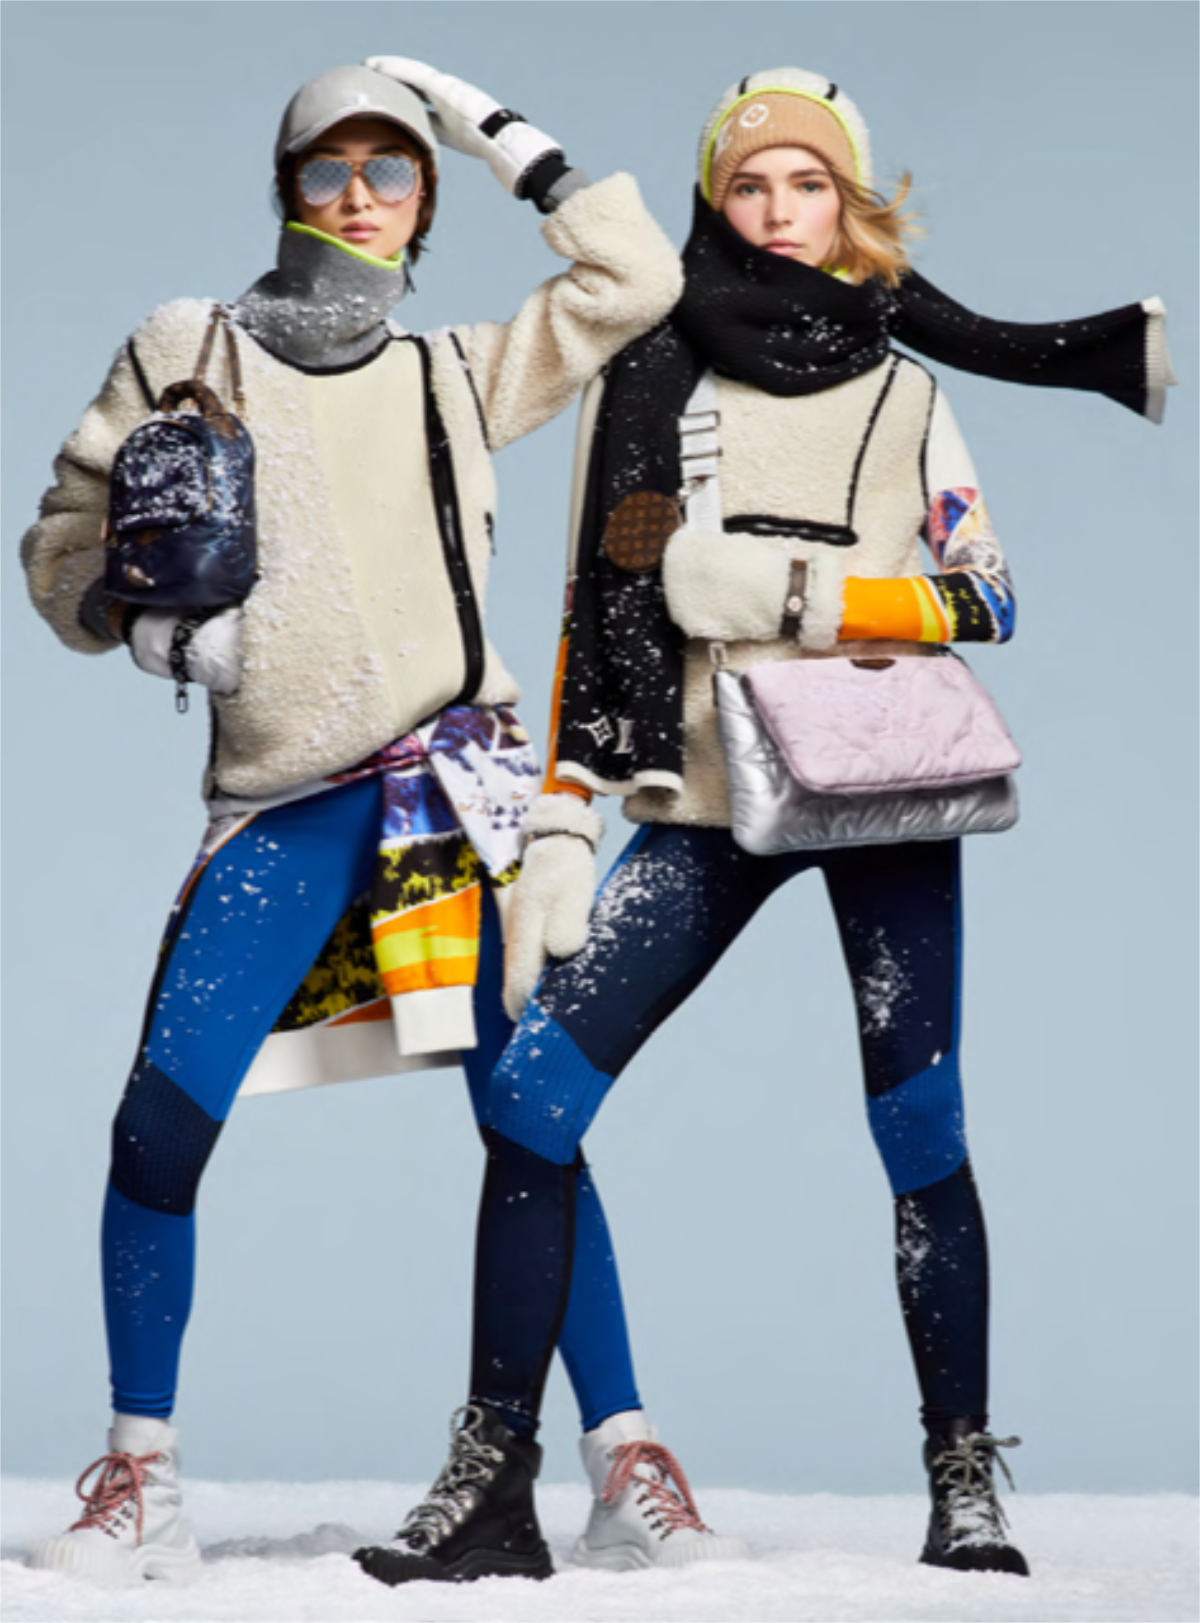 Louis Vuitton Presents Its New LV Ski Collection